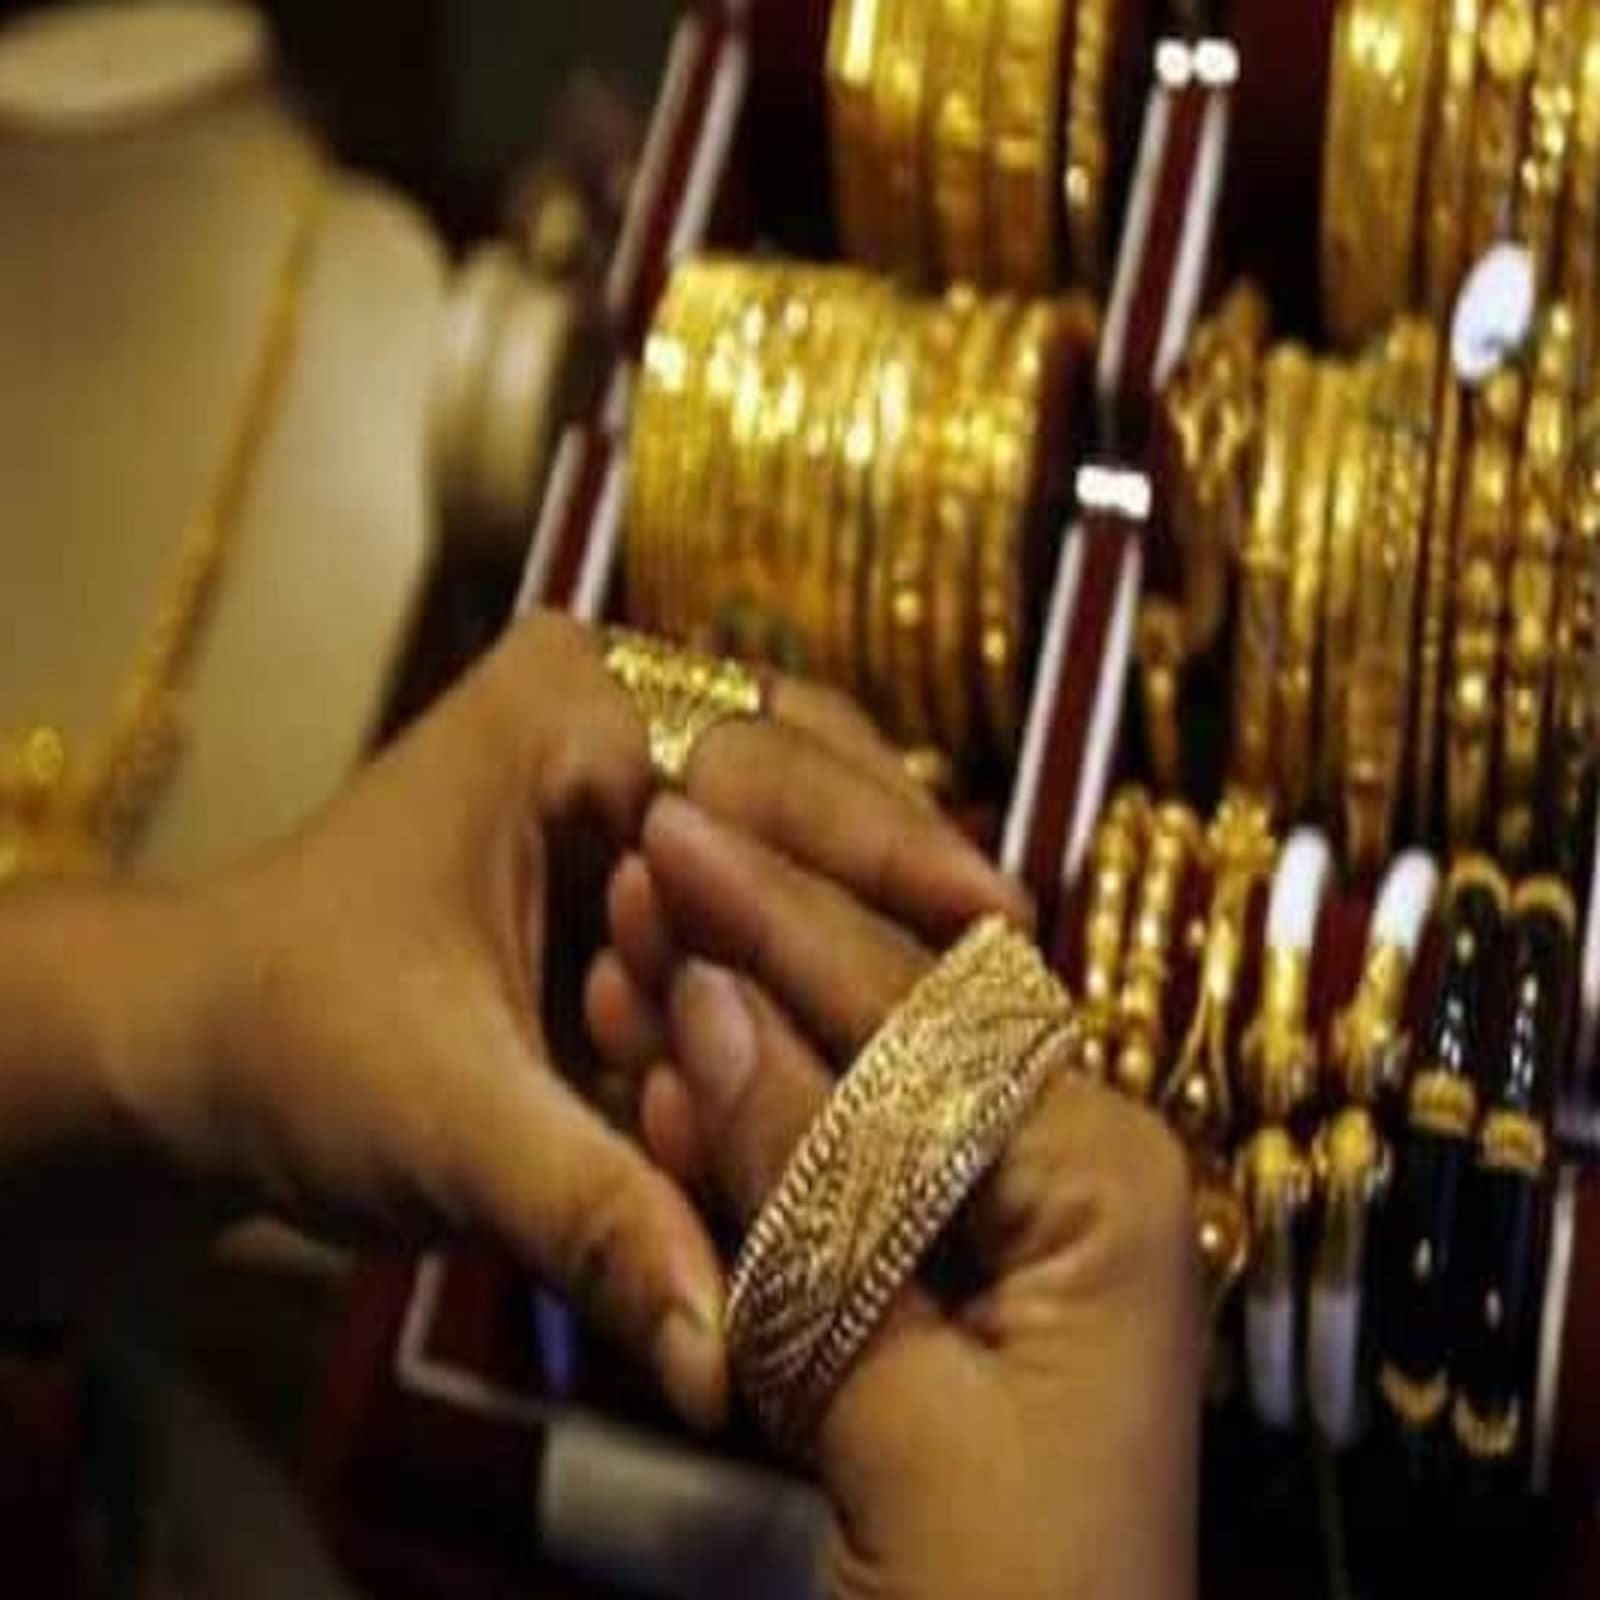 How do you know the price of gold sitting at home?  You can easily know the price of gold sitting at home  All you have to do is make a missed call to 8955664433  And a message will come to your phone where you will see the latest price of gold 7